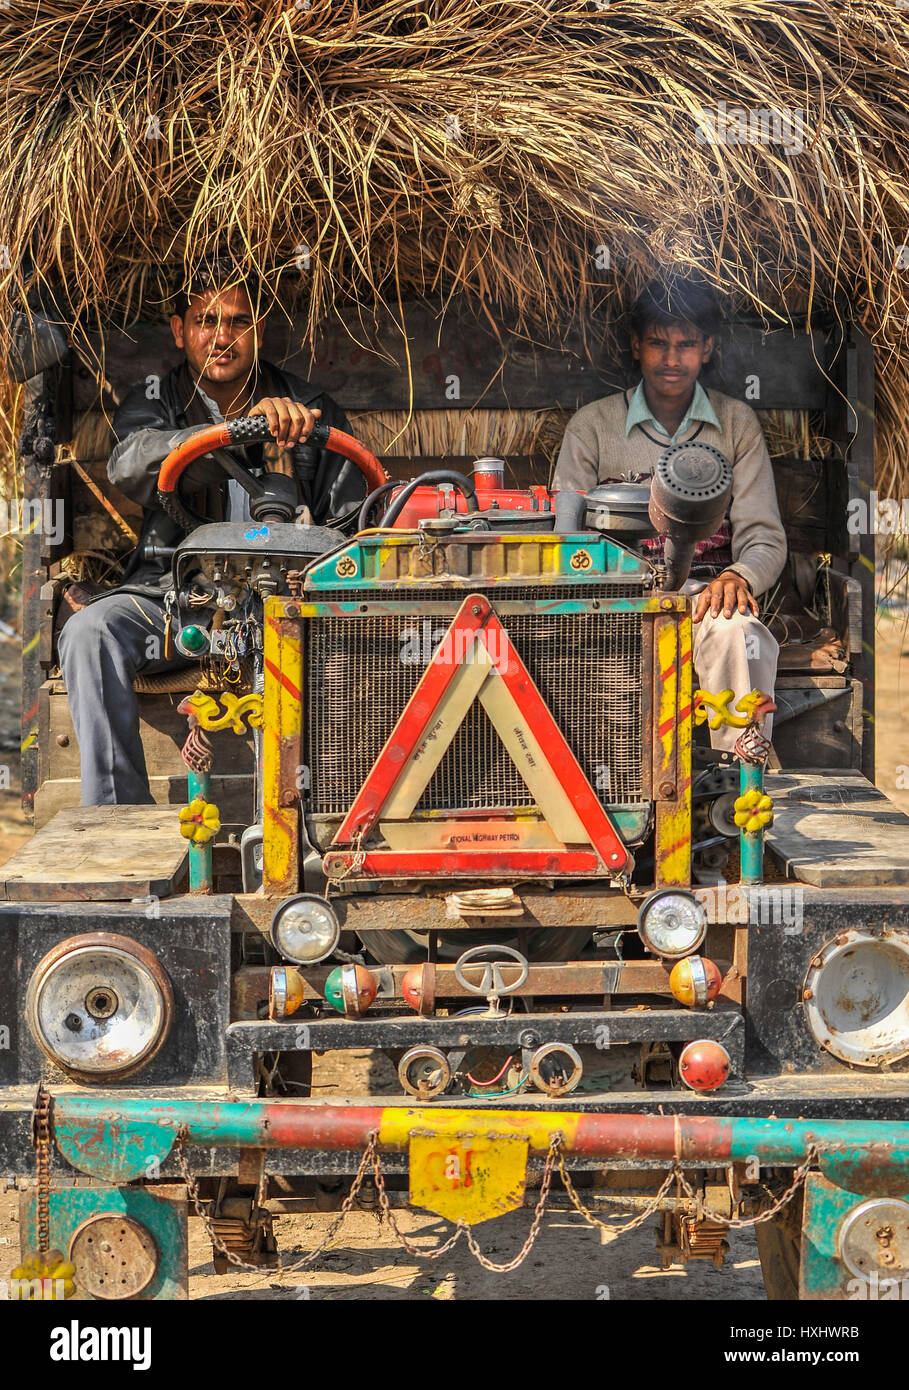 Driver and his mate seated in a cabinless truck loaded with elephant grass, India Stock Photo